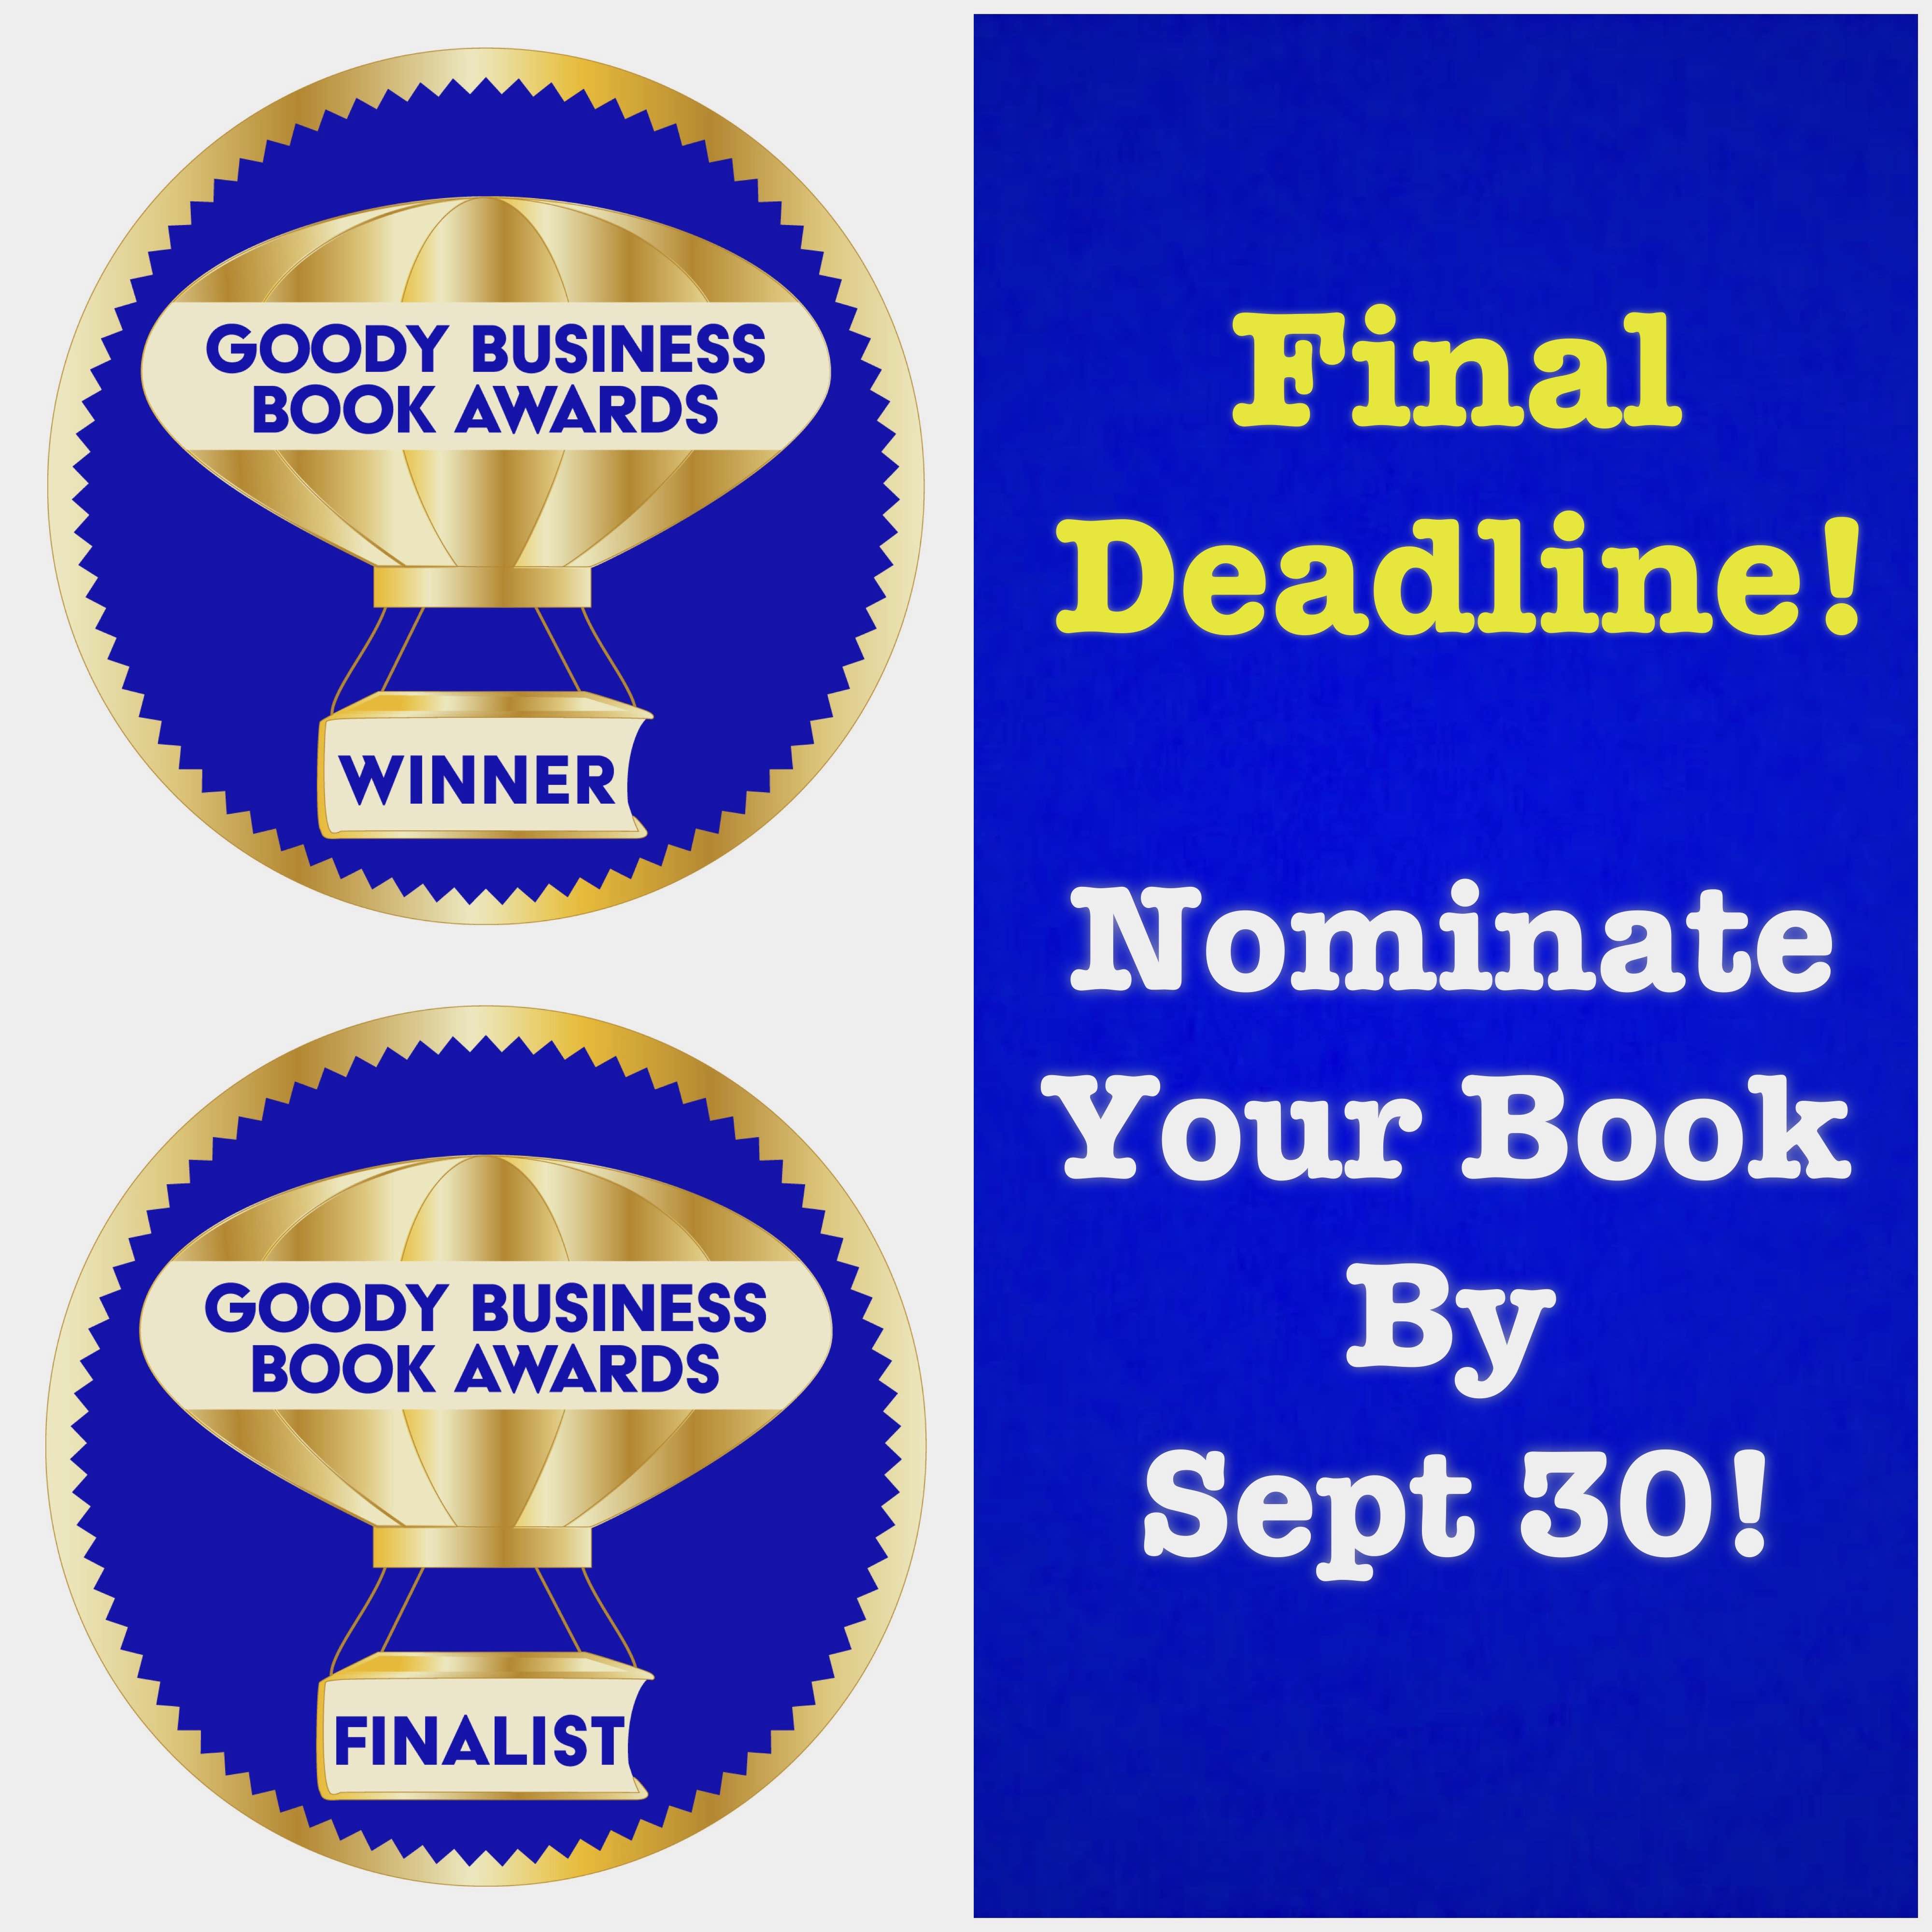 The final deadline for authors to submit books to the Goody Business Book Awards is September 30.